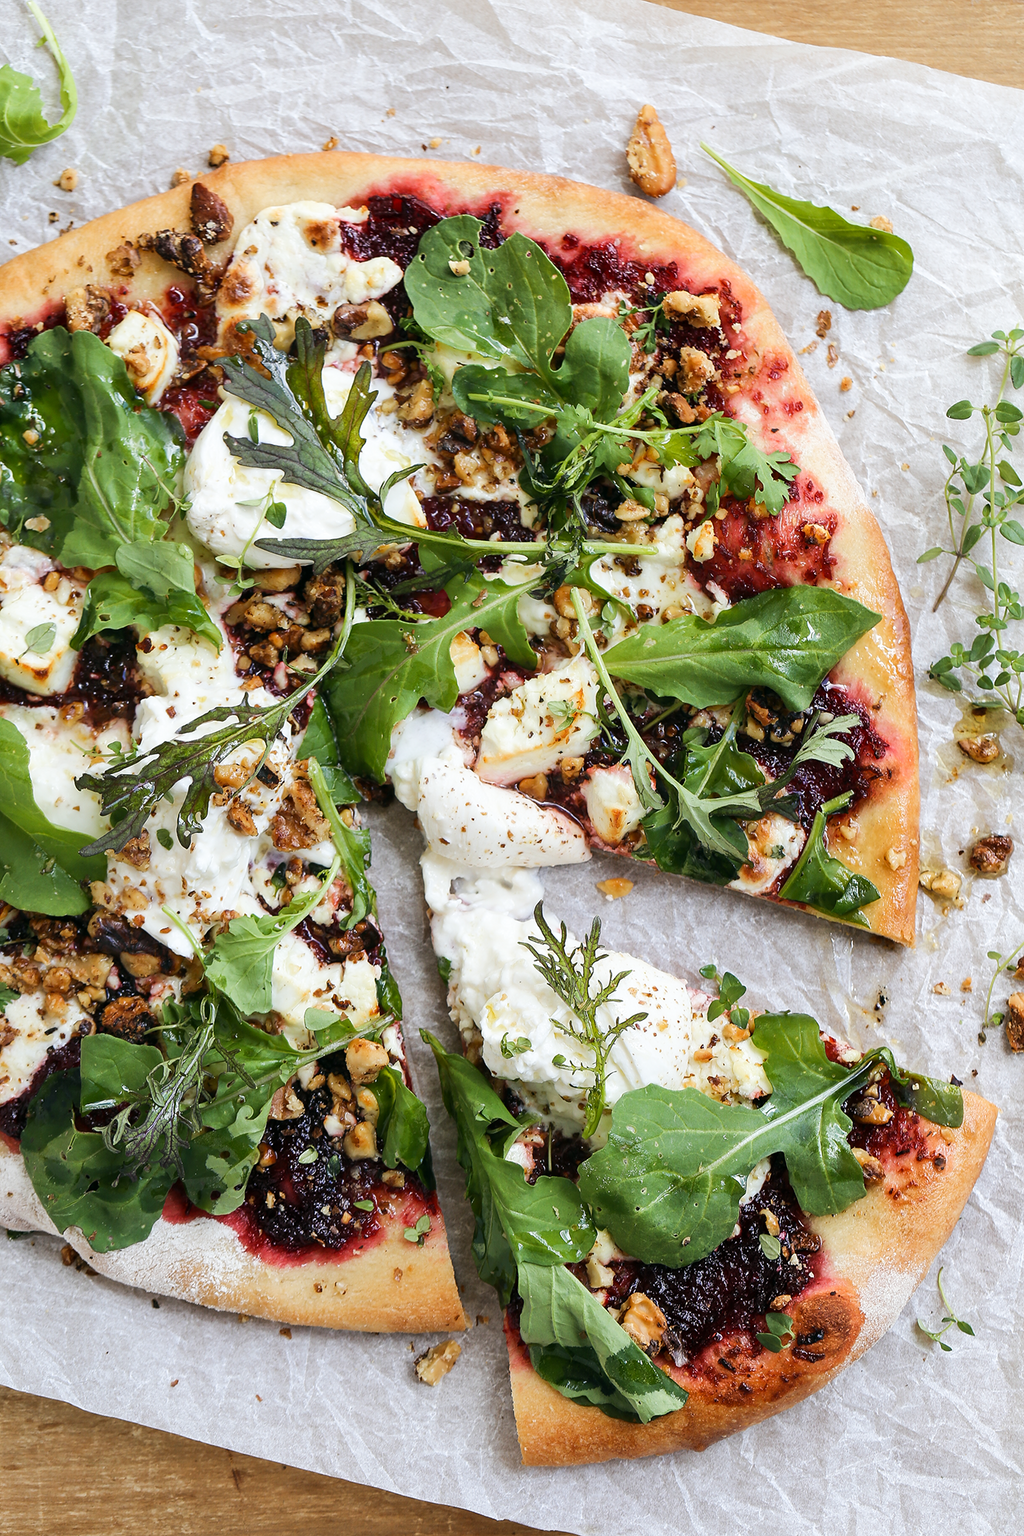 Pickled Beet Pizza with Goats Cheese, Arugula, Walnuts and Buratta